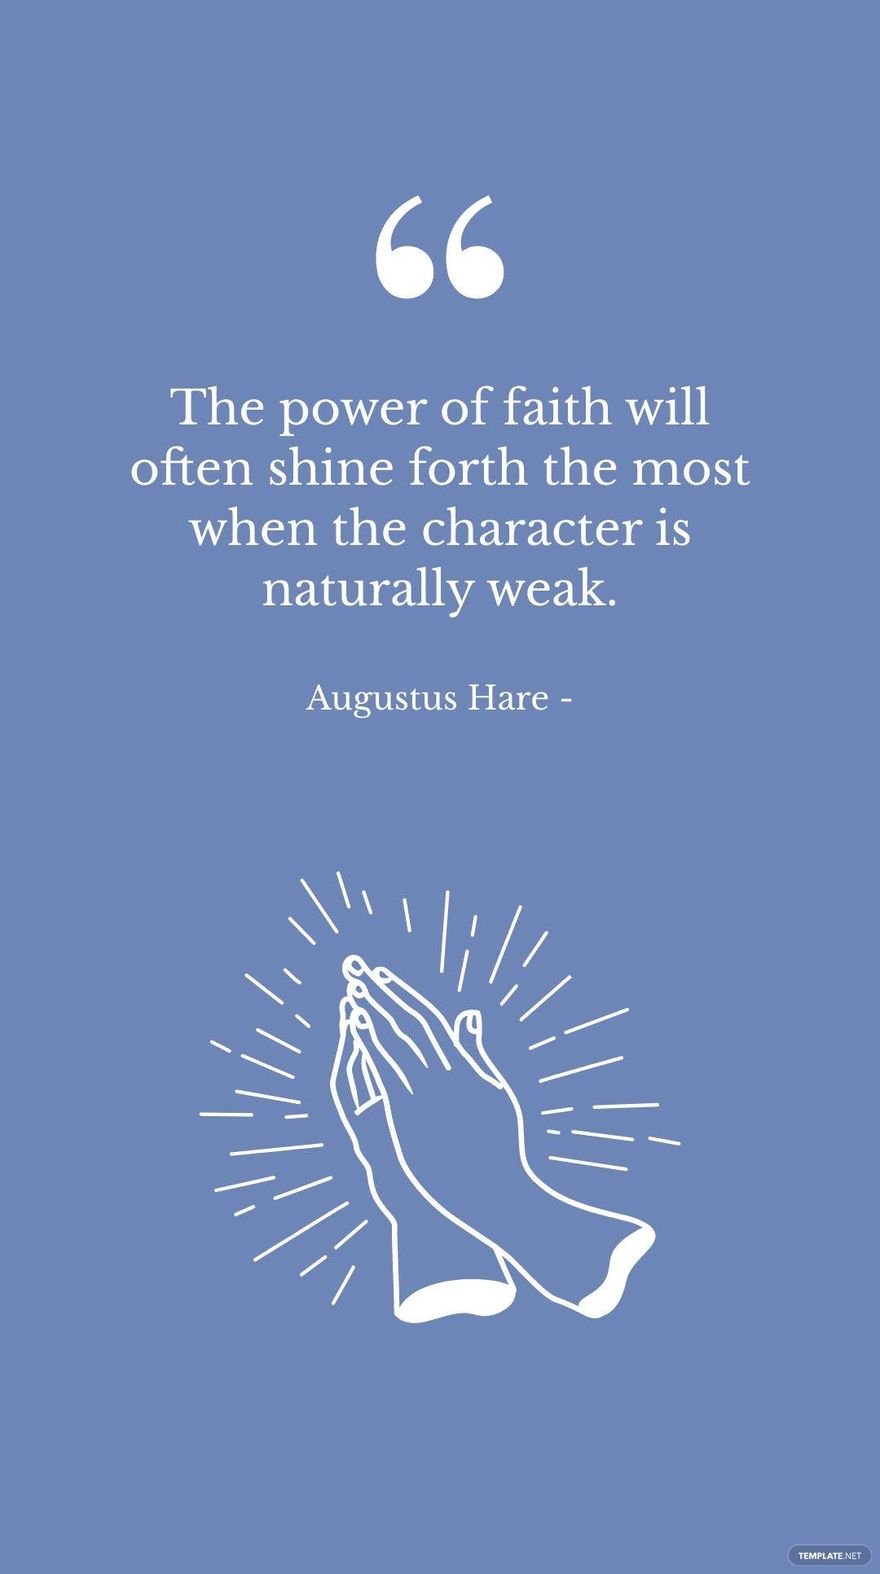 Augustus Hare - The power of faith will often shine forth the most when the character is naturally weak.